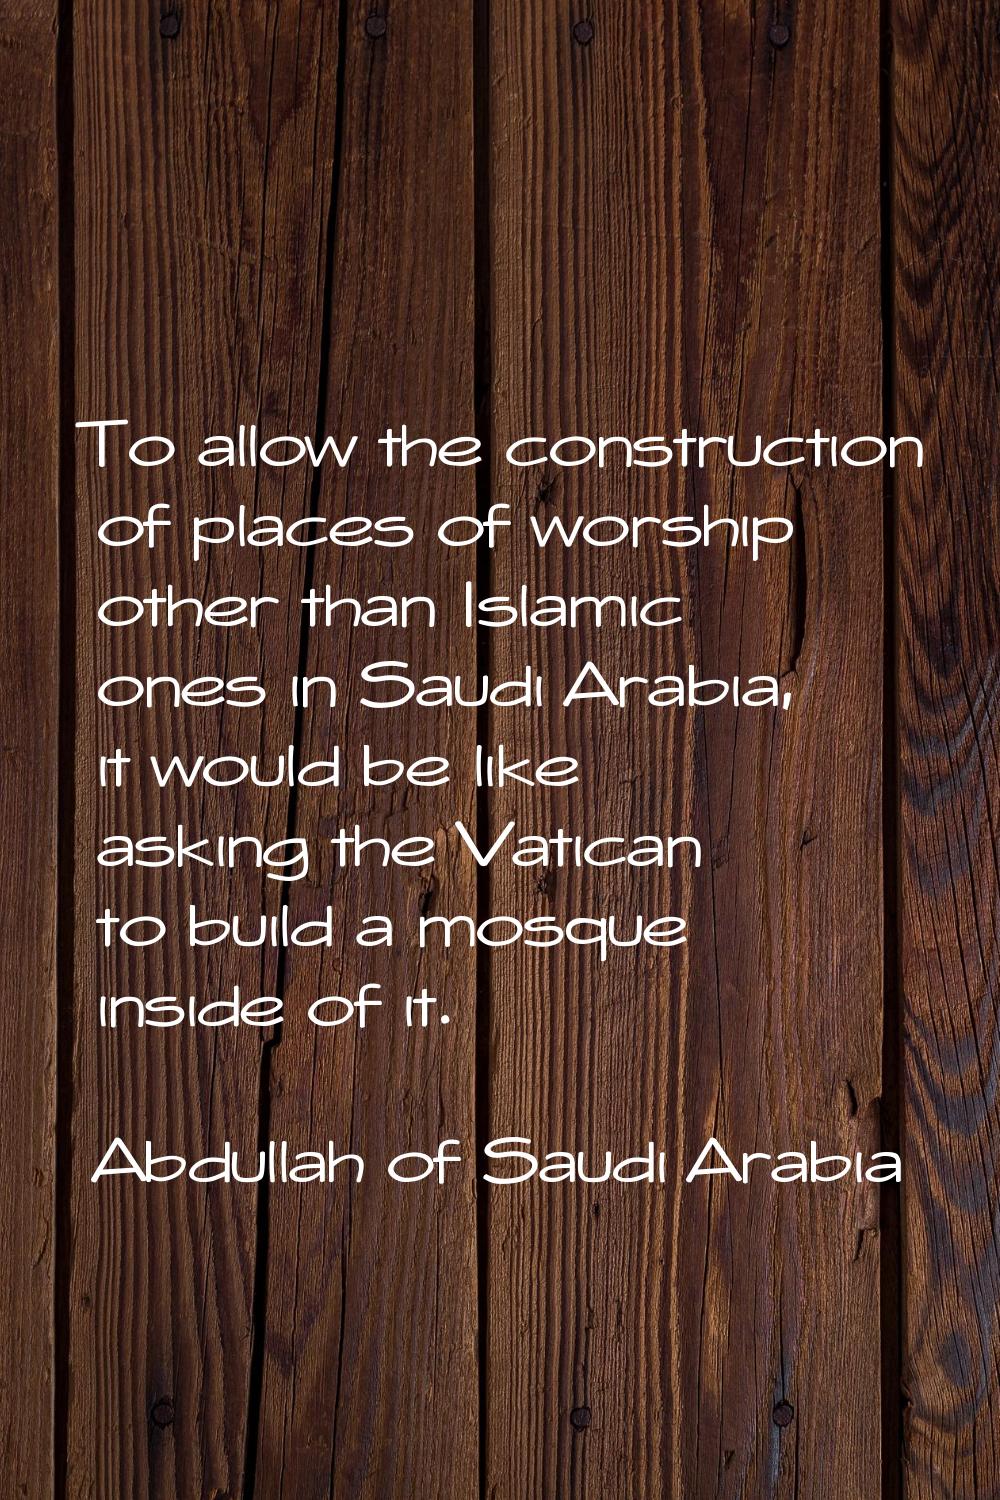 To allow the construction of places of worship other than Islamic ones in Saudi Arabia, it would be